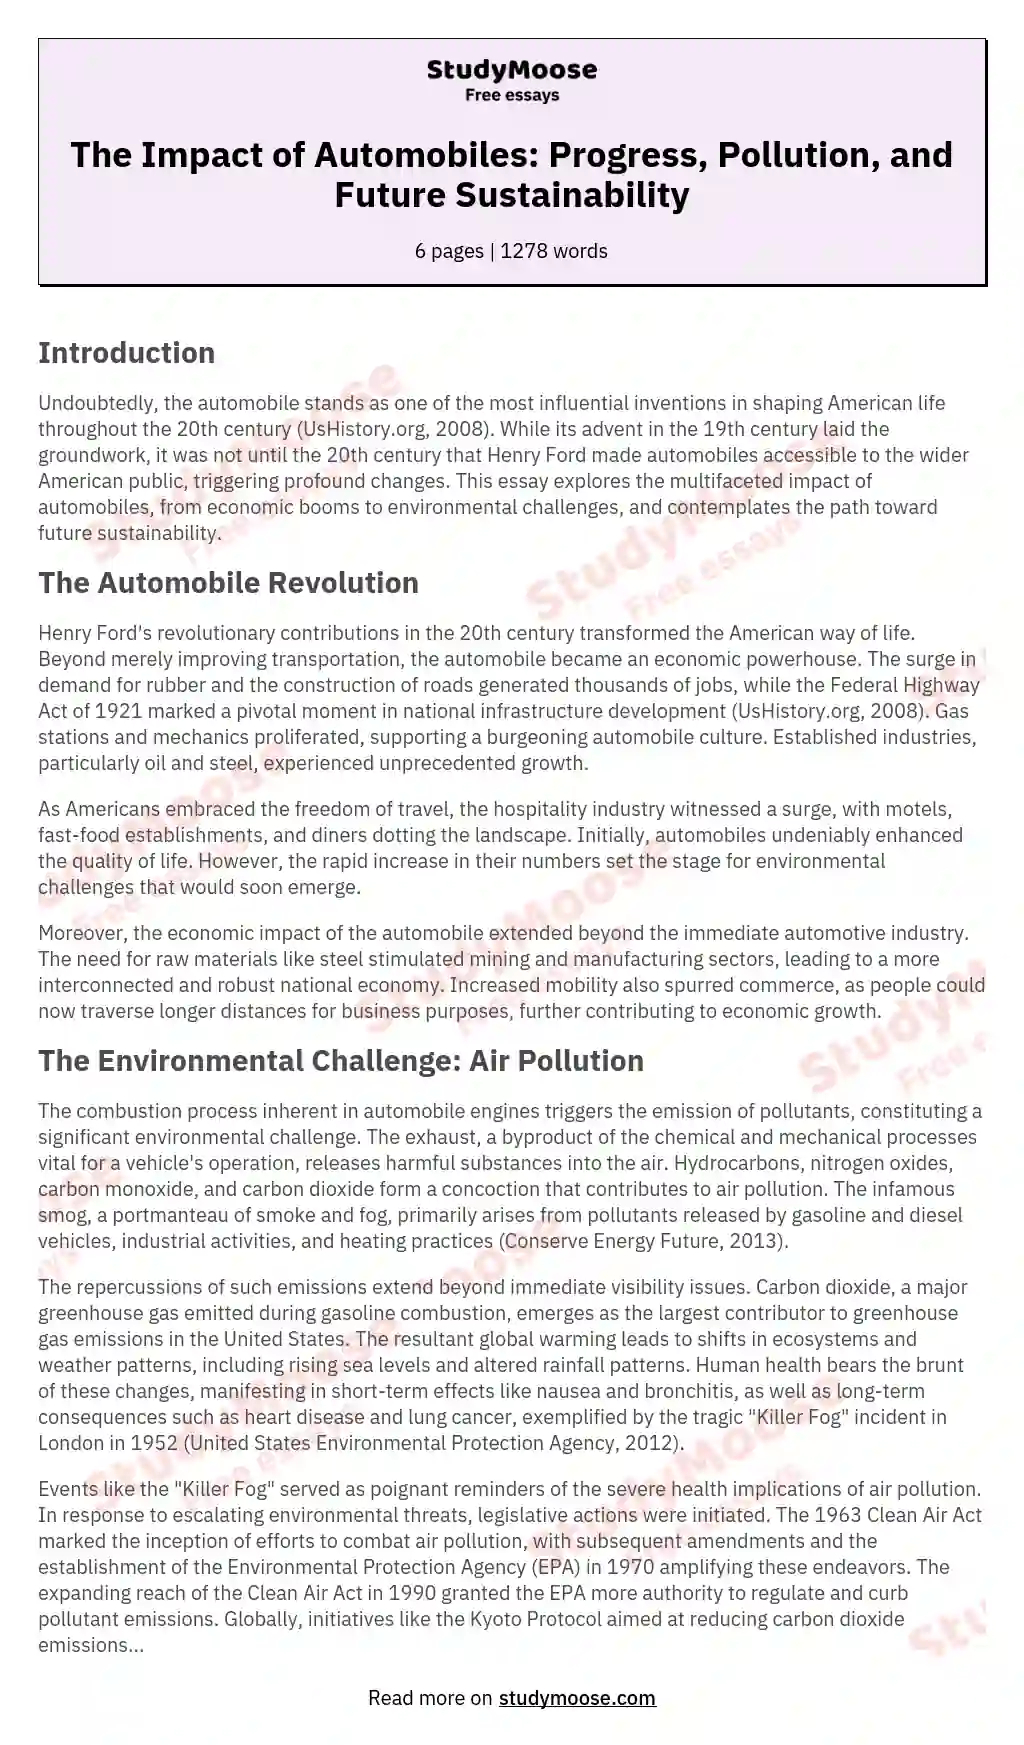 The Impact of Automobiles: Progress, Pollution, and Future Sustainability essay